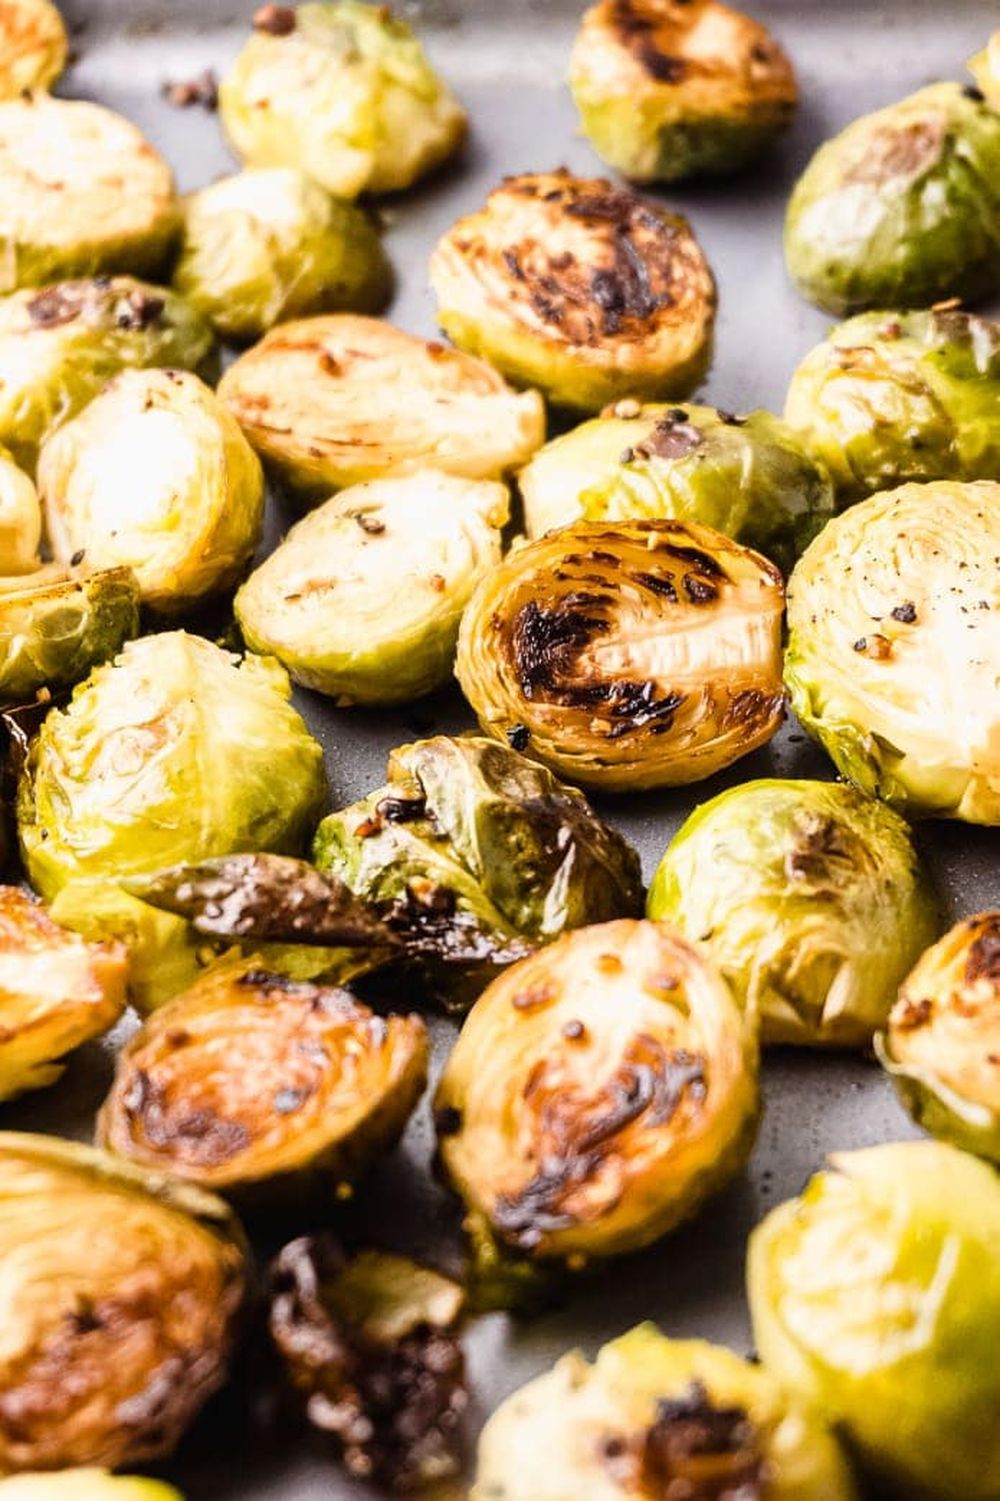 Healthy st patrick's day snacks oven baked brussels sprouts